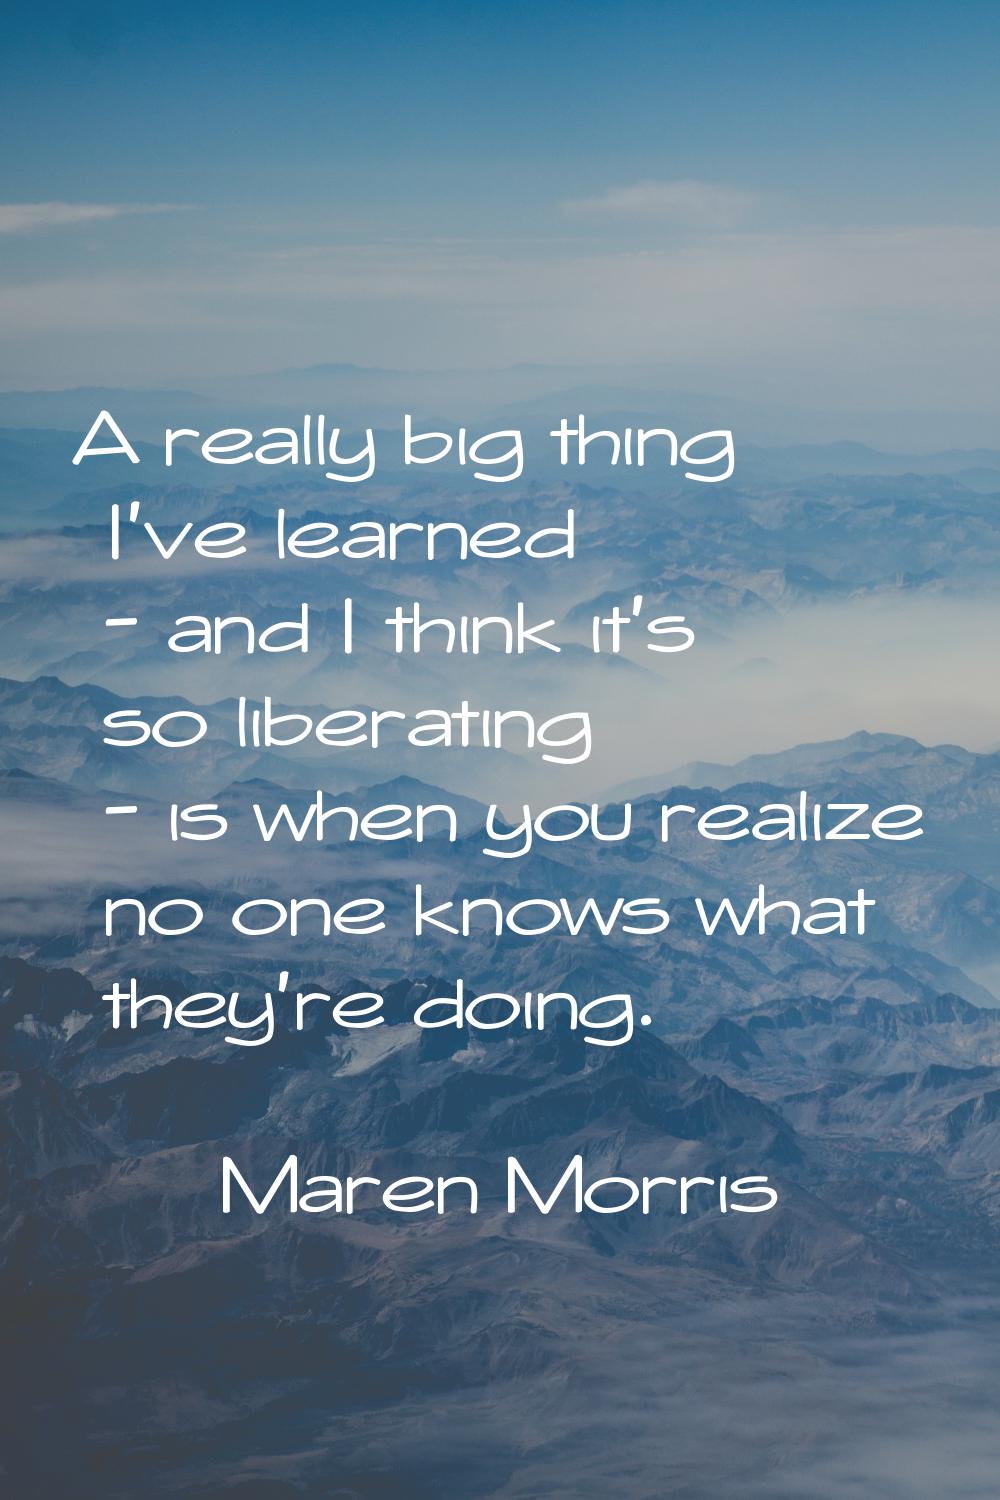 A really big thing I've learned - and I think it's so liberating - is when you realize no one knows